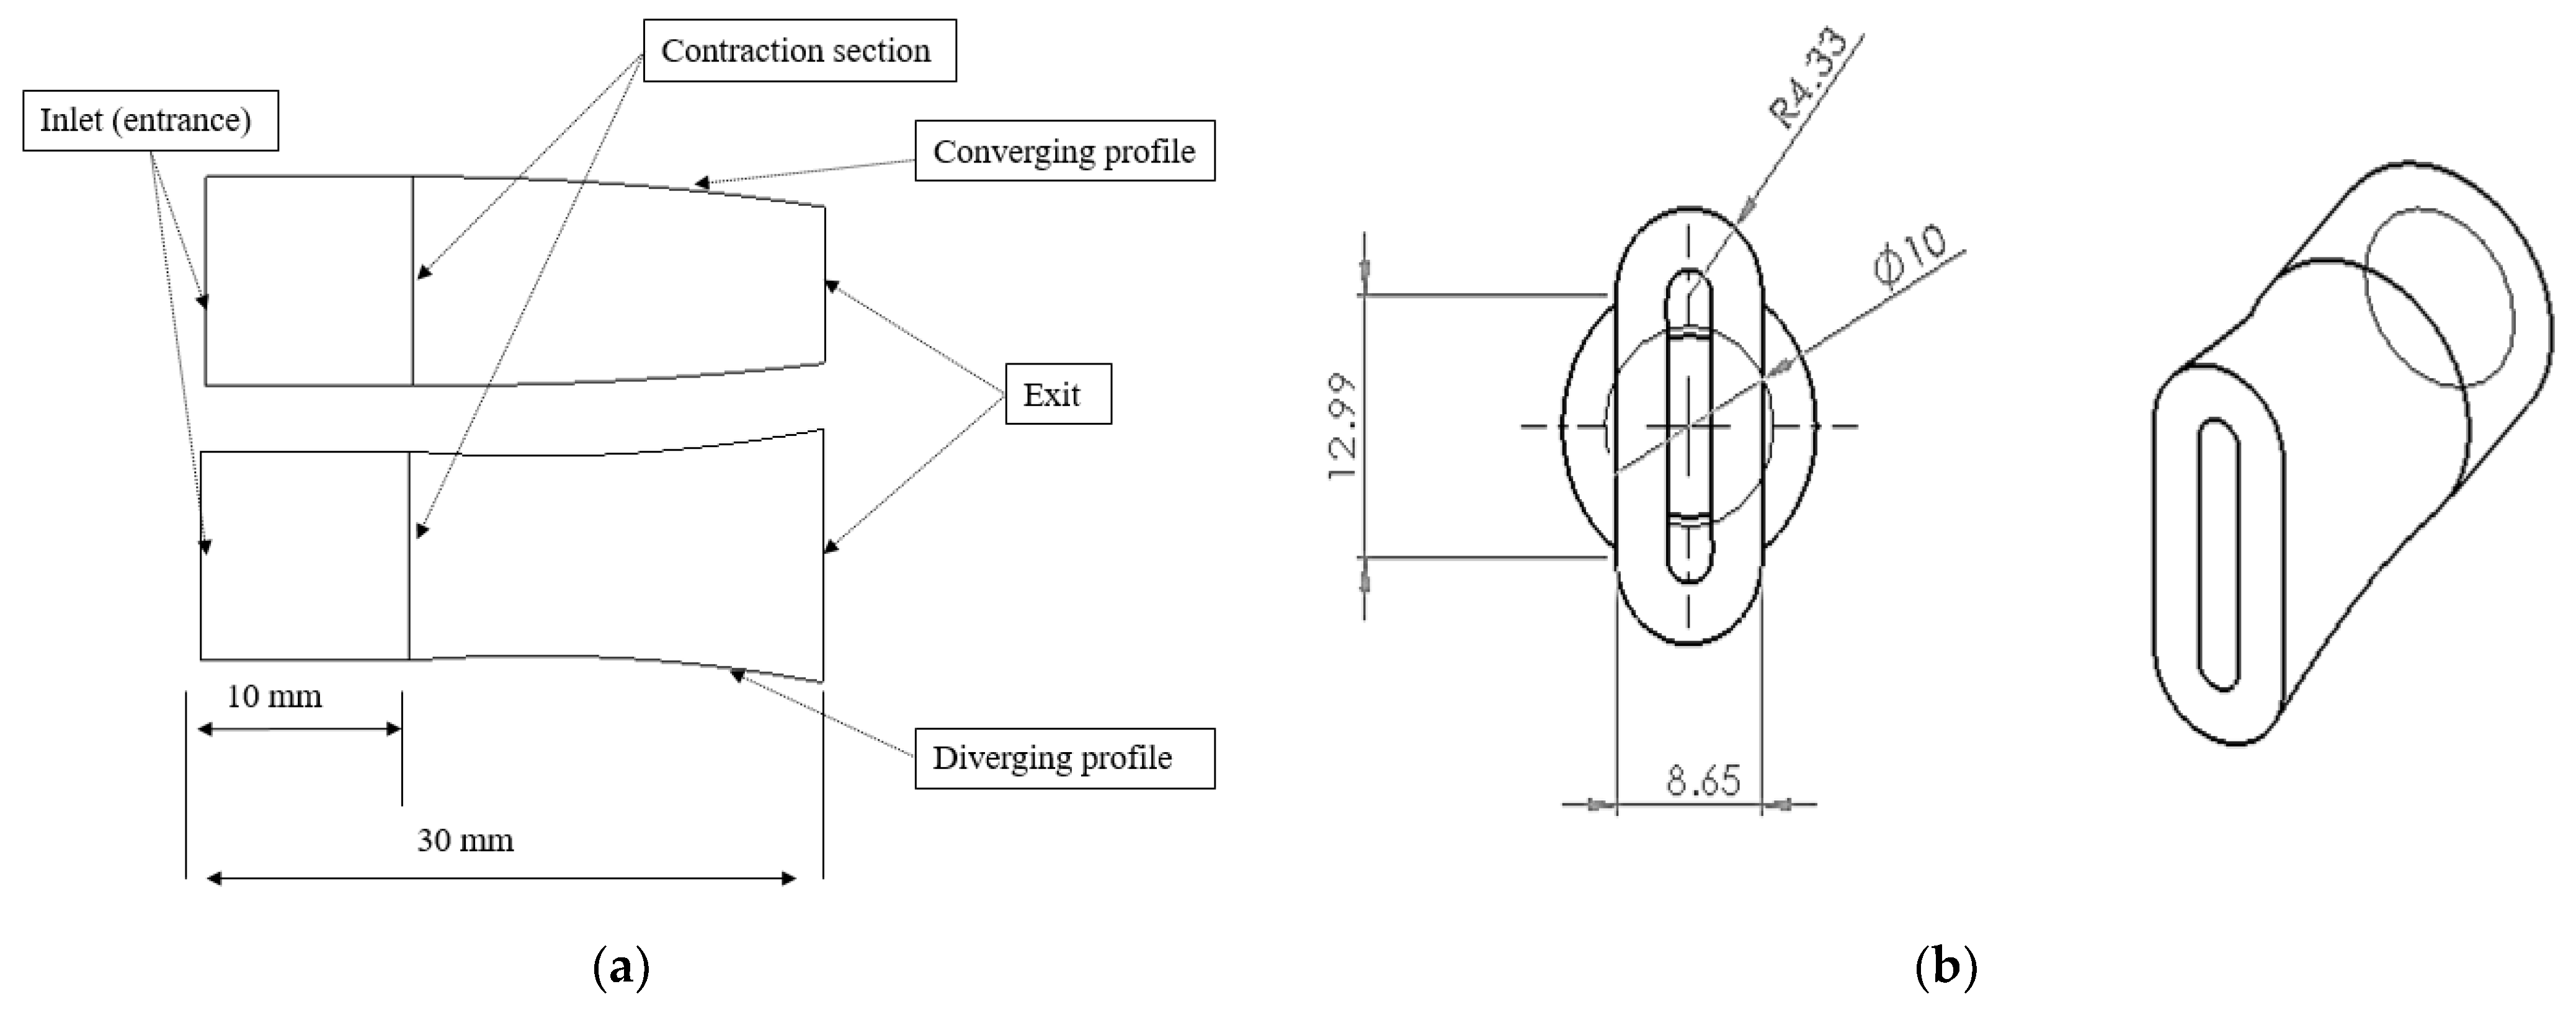 J. Compos. Sci. | Free Full-Text | Improving the Alignment of Dynamic  Sheet-Formed Mats by Changing Nozzle Geometry and Their Reinforcement of  Polypropylene Matrix Composites | HTML